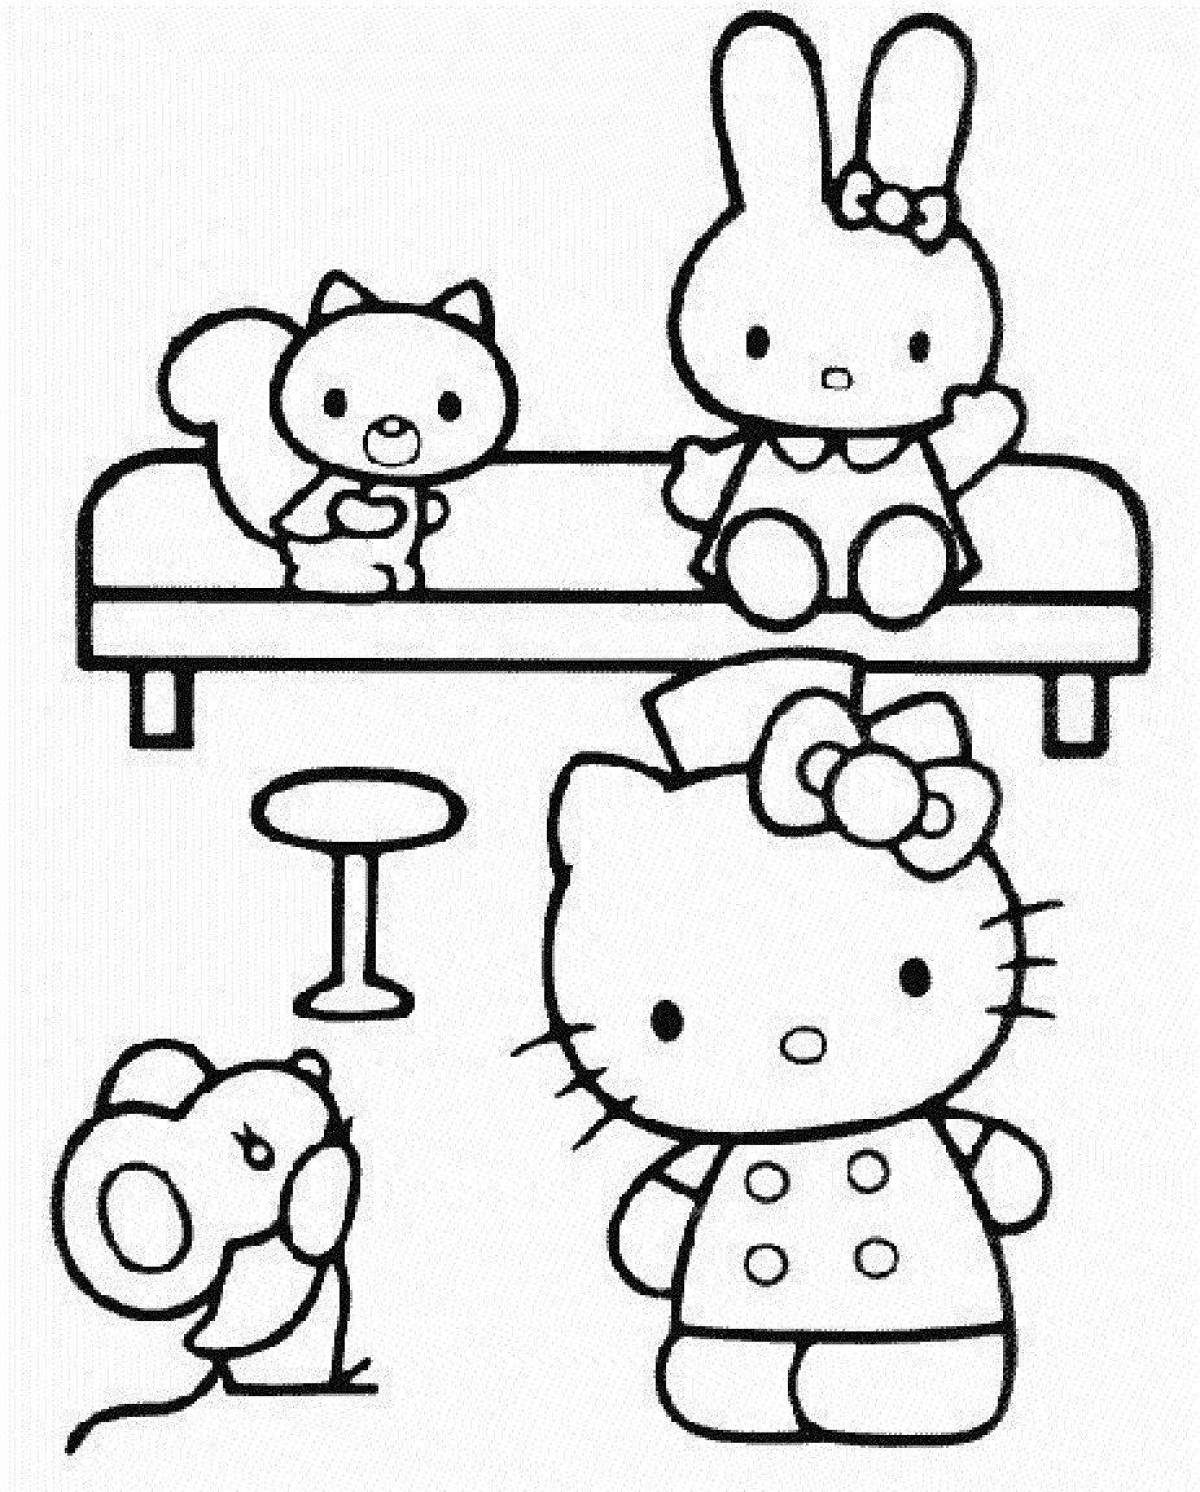 Amazing hello kitty bunny coloring page